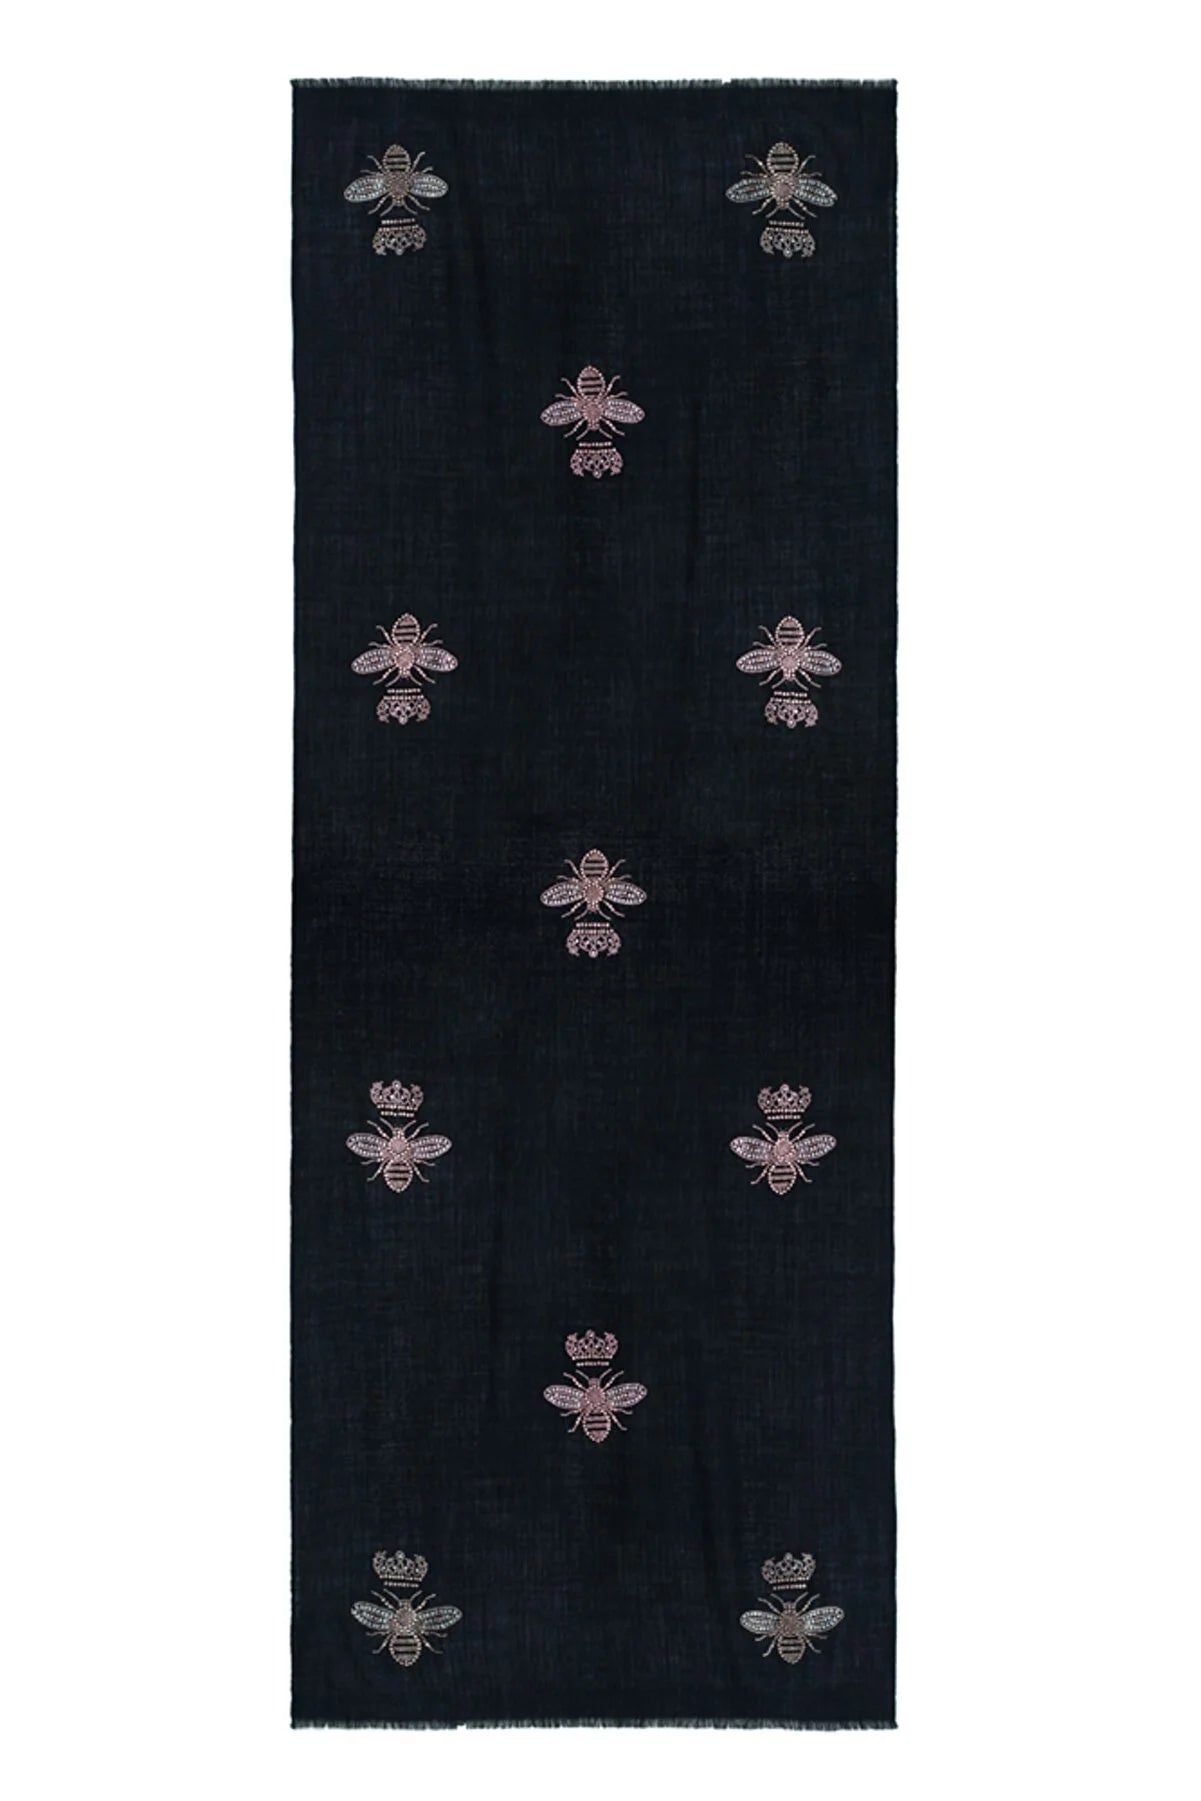 Queen Bee Crystal Cashmere Silk Stole - Black